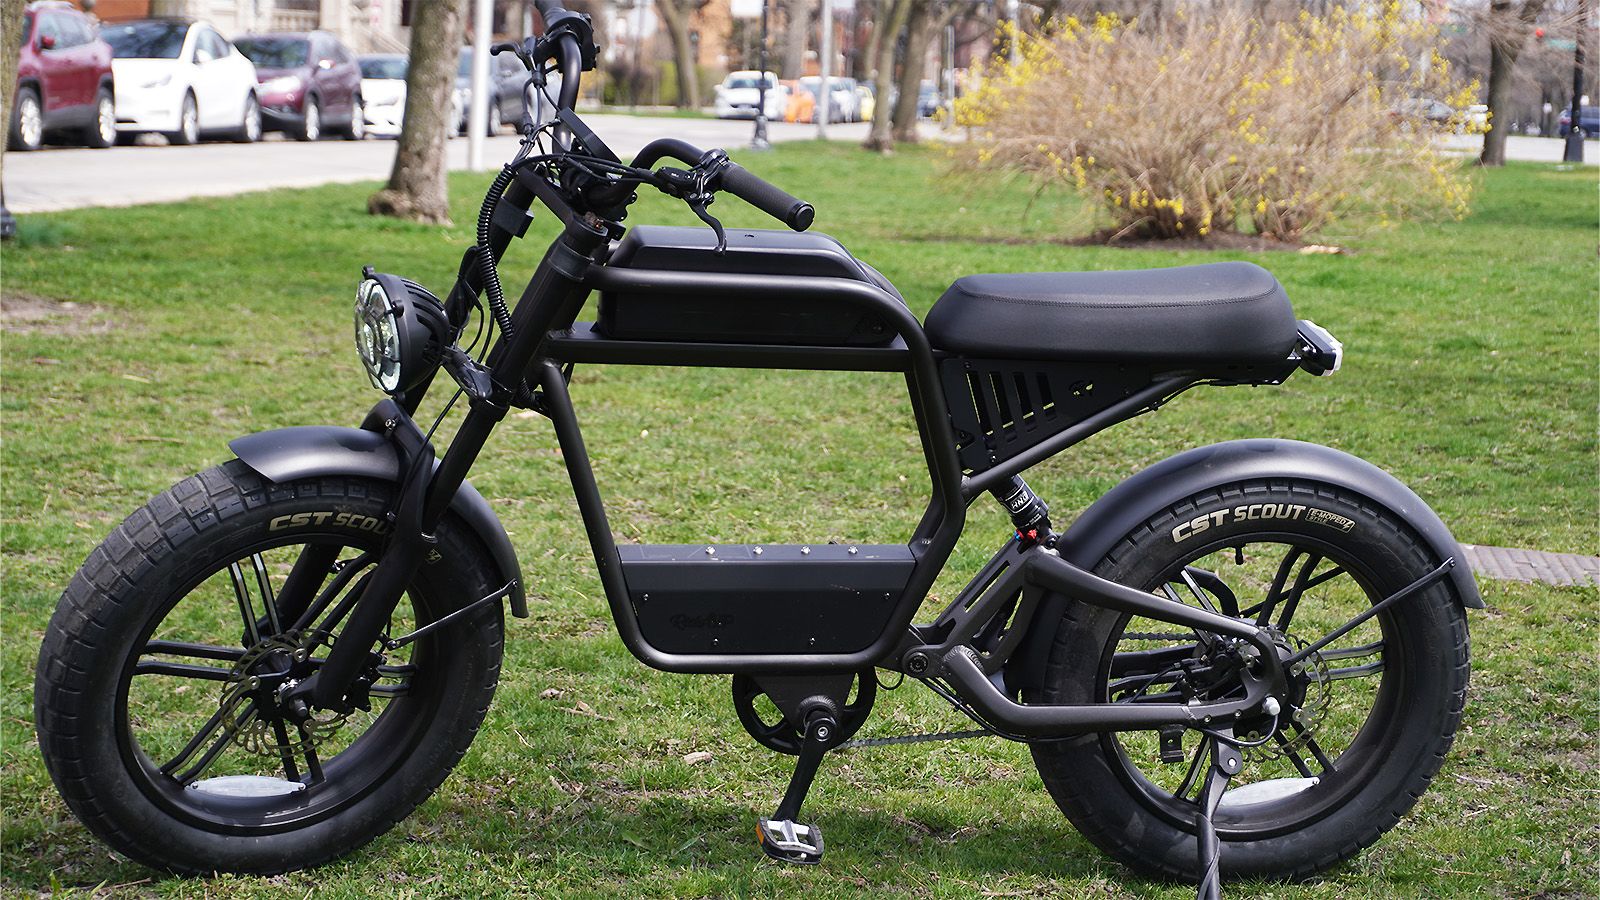 Revv 1 Moped-Style Electric Bike